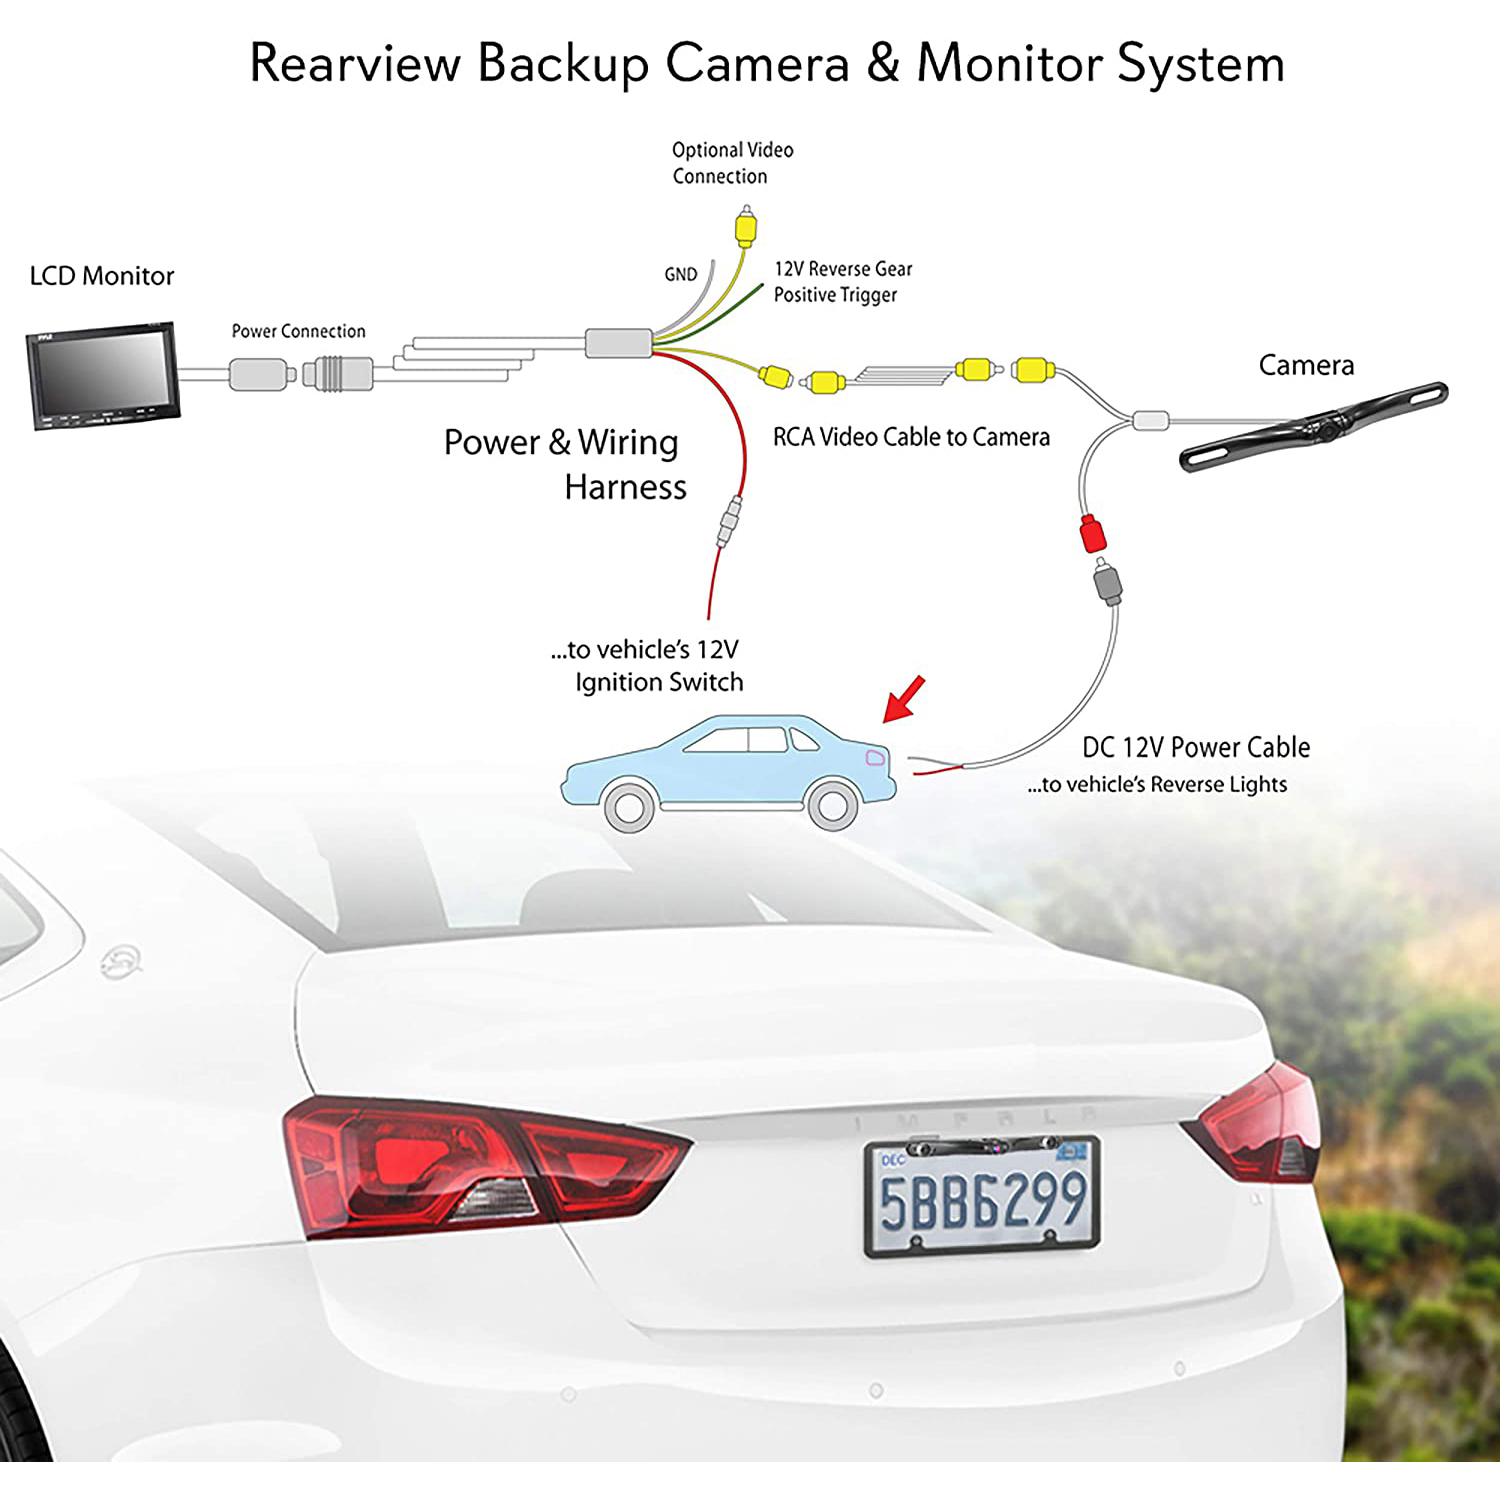 Pyle PLCM7500 7" LCD Rearview Car Backup Camera and Monitor Reverse Assist Kit - image 2 of 6